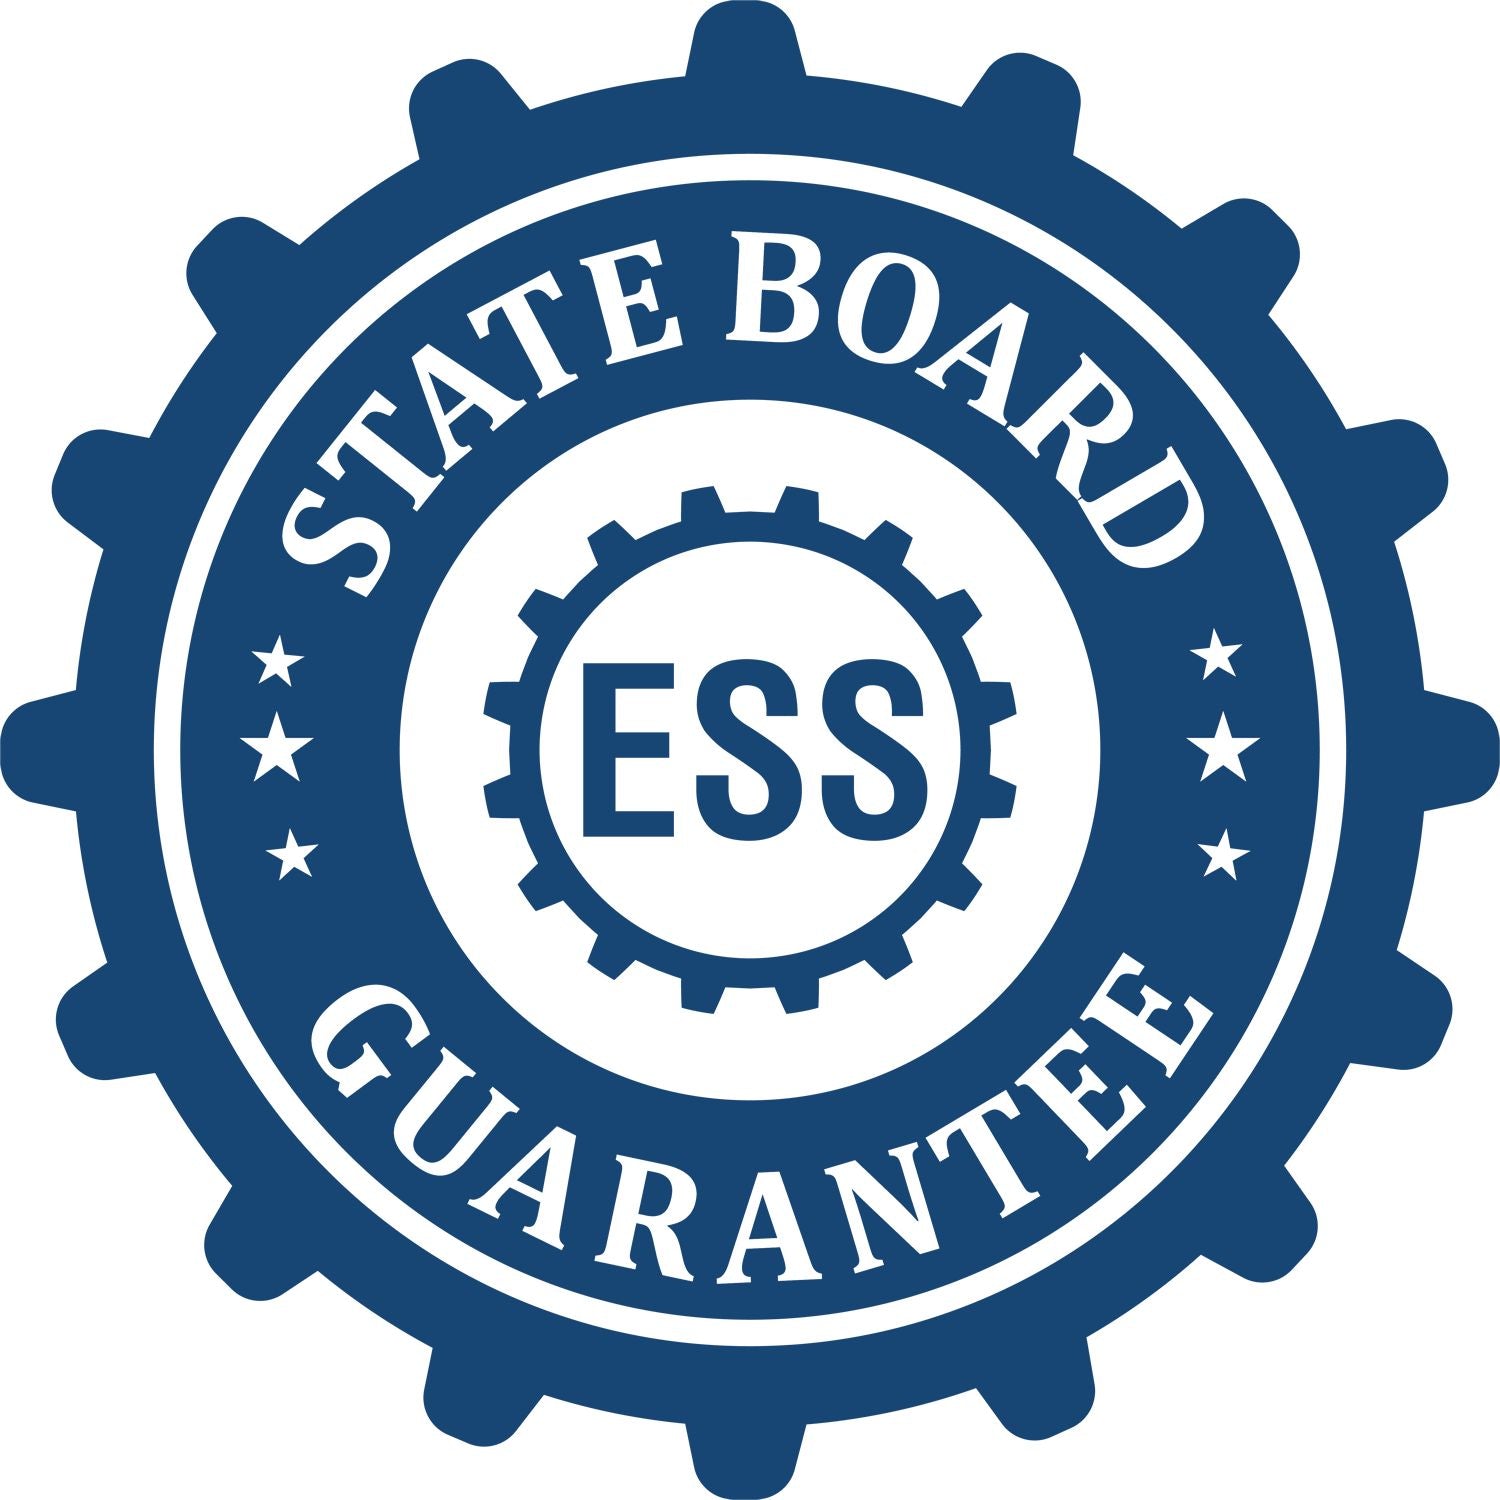 An emblem in a gear shape illustrating a state board guarantee for the Arkansas Desk Architect Embossing Seal product.